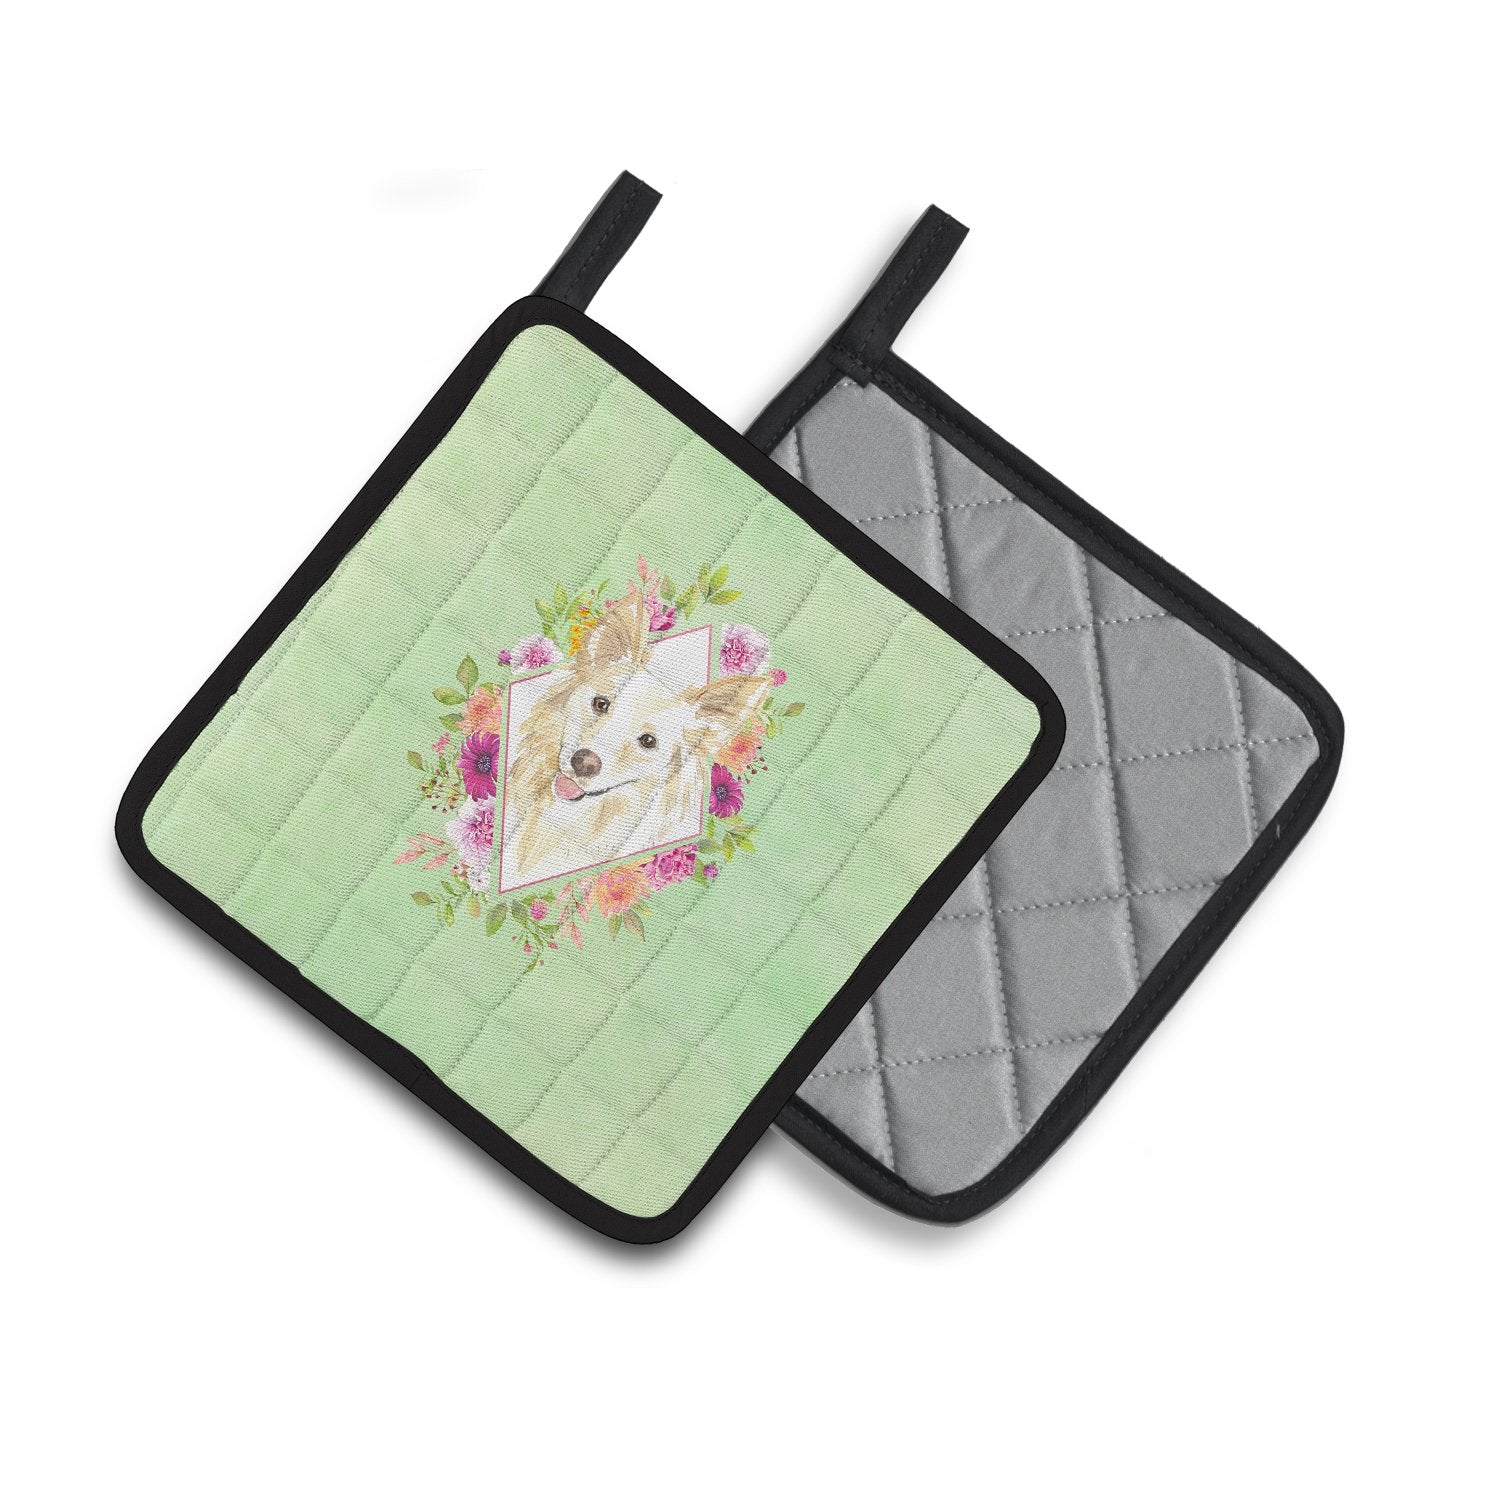 White Collie Green Flowers Pair of Pot Holders CK4361PTHD by Caroline's Treasures